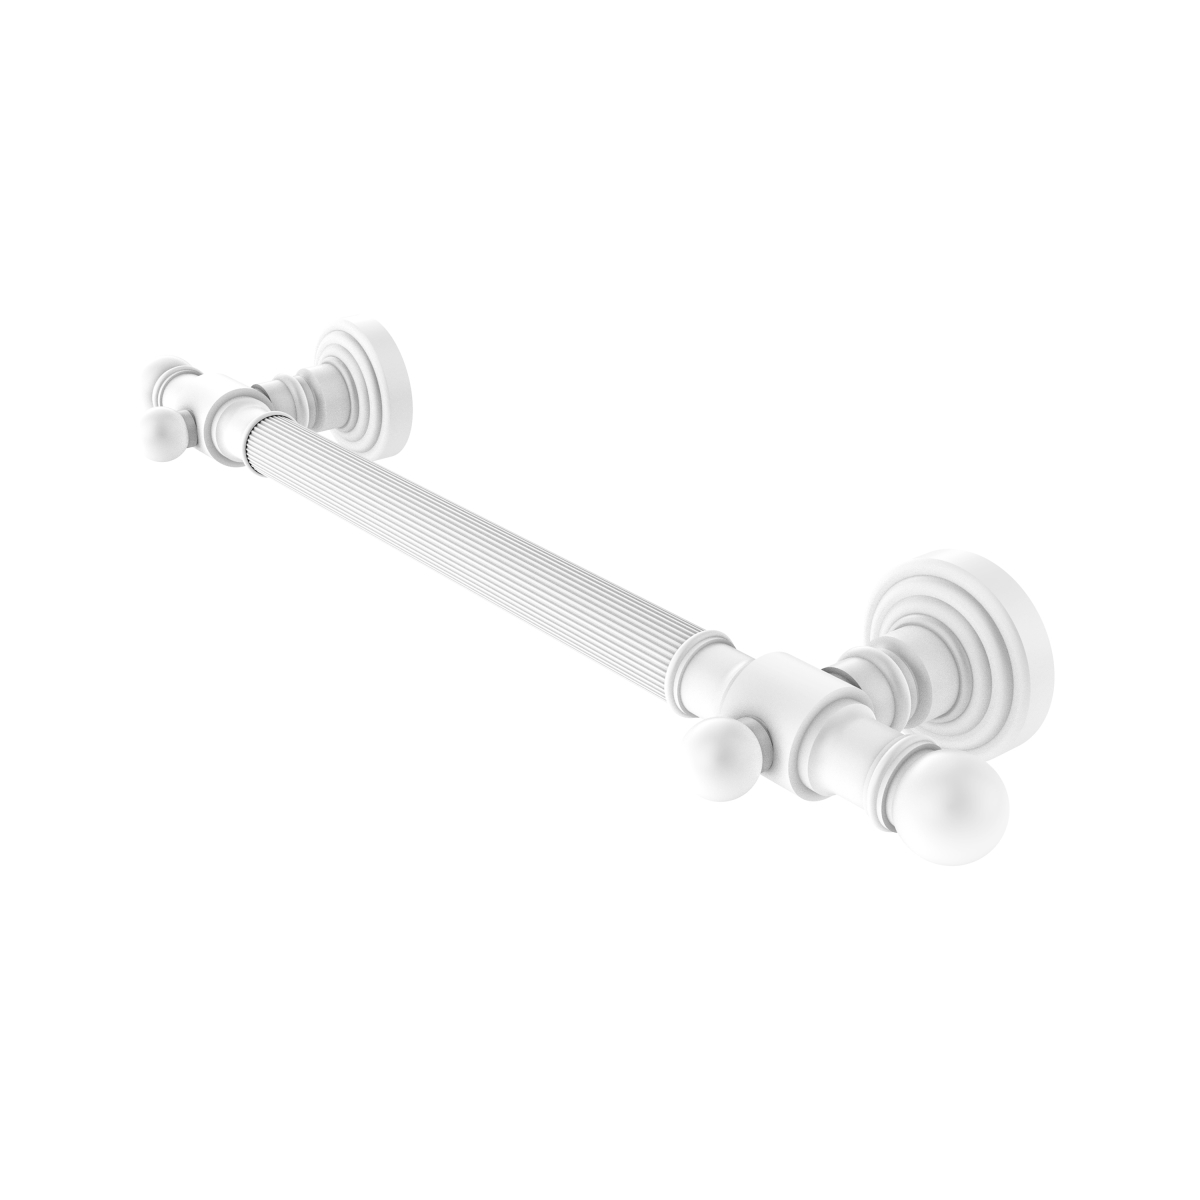 Picture of Allied Brass WP-GRR-16-WHM 16 in. Reeded Grab Bar, Matte White - 3.5 x 22 x 16 in.